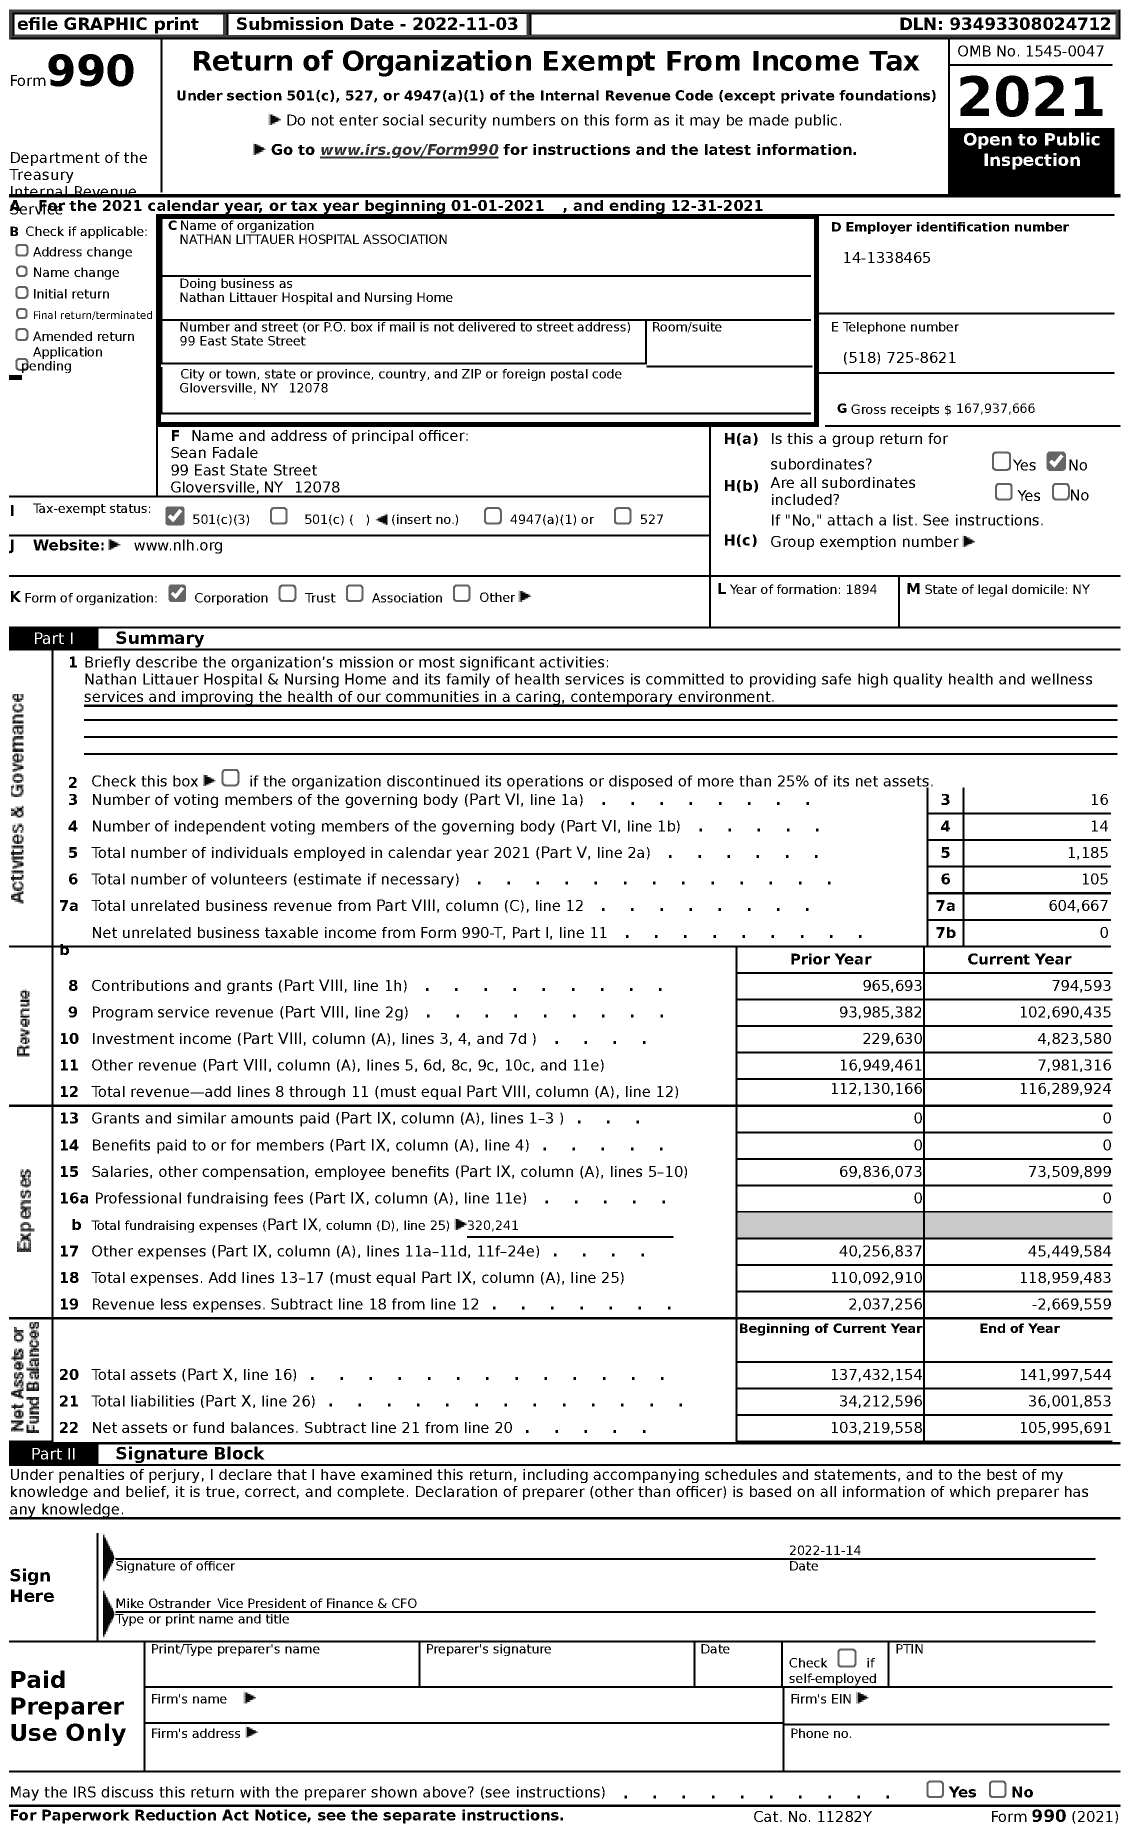 Image of first page of 2021 Form 990 for Nathan Littauer Hospital and Nursing Home (NLH)